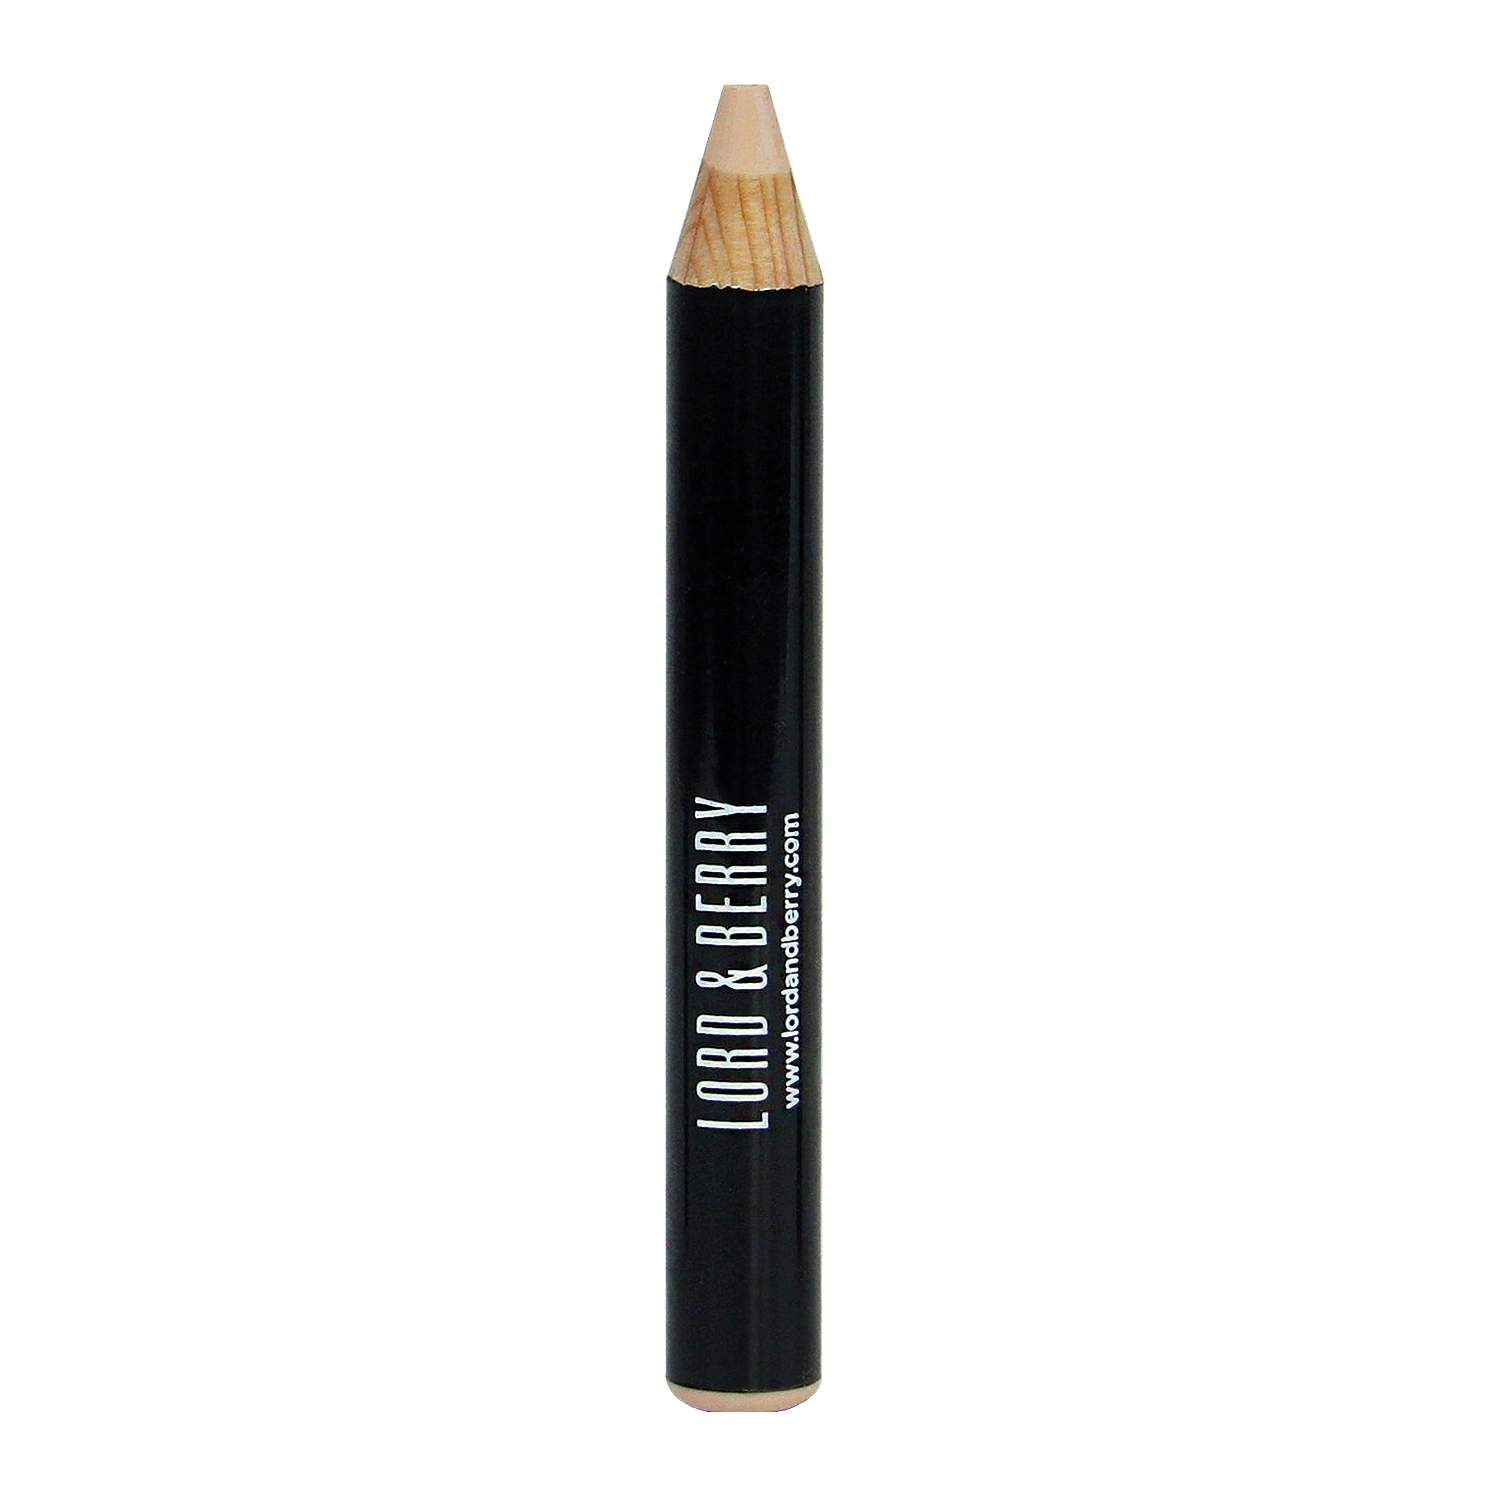 Lord & Berry Concealer Stick Lord & Berry Concealer Stick - Ivory 1